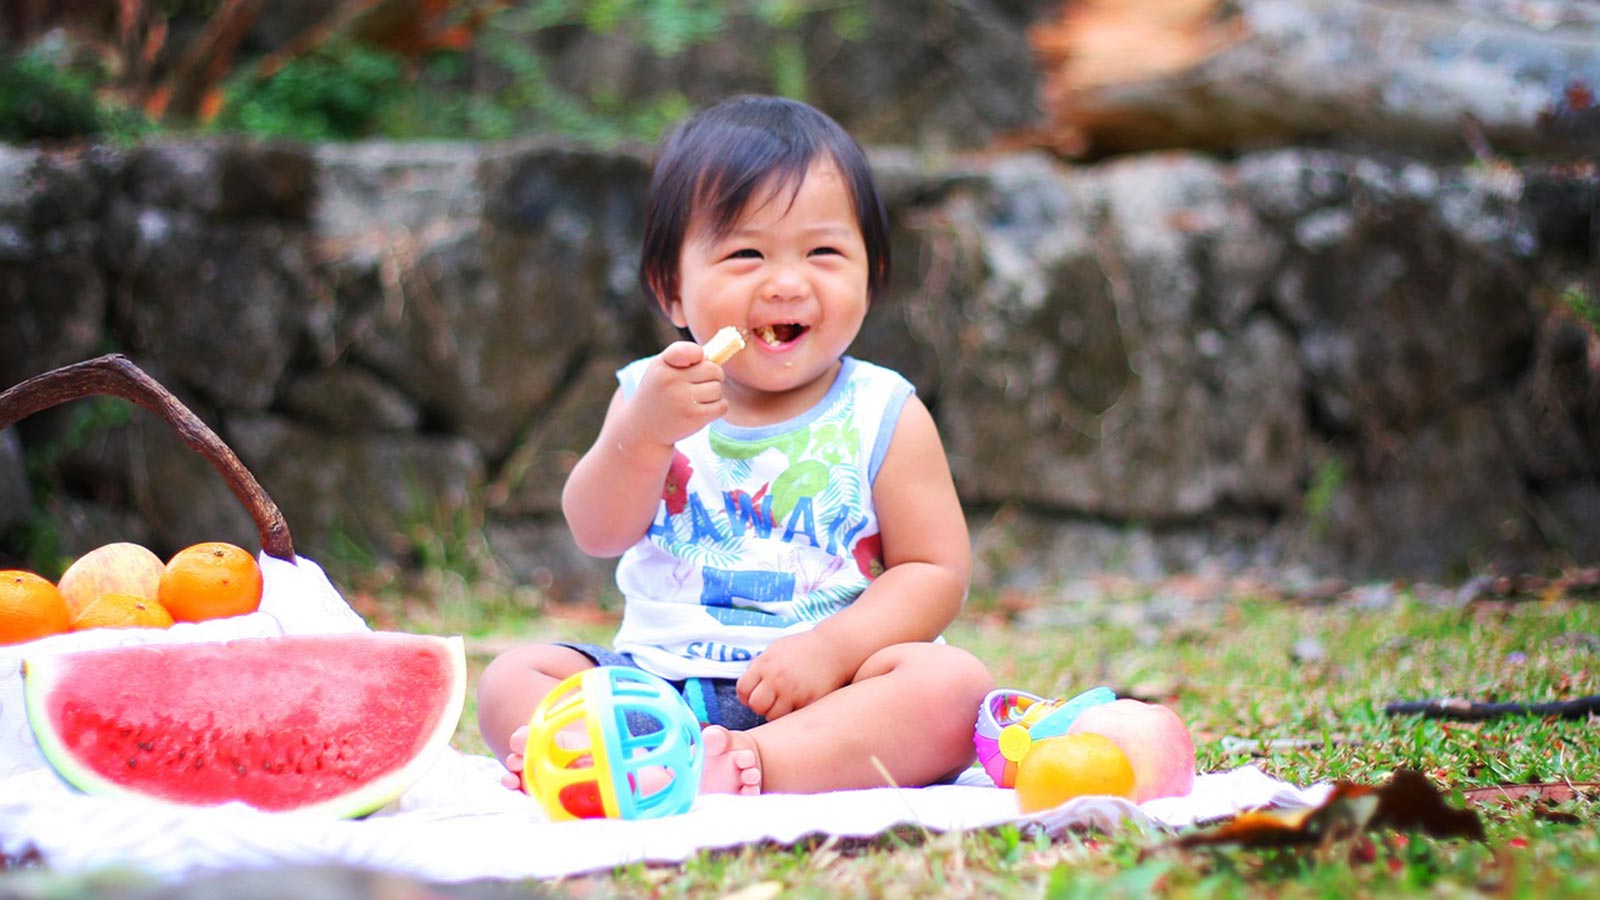 Asian baby eating and playing on a picnic blanket